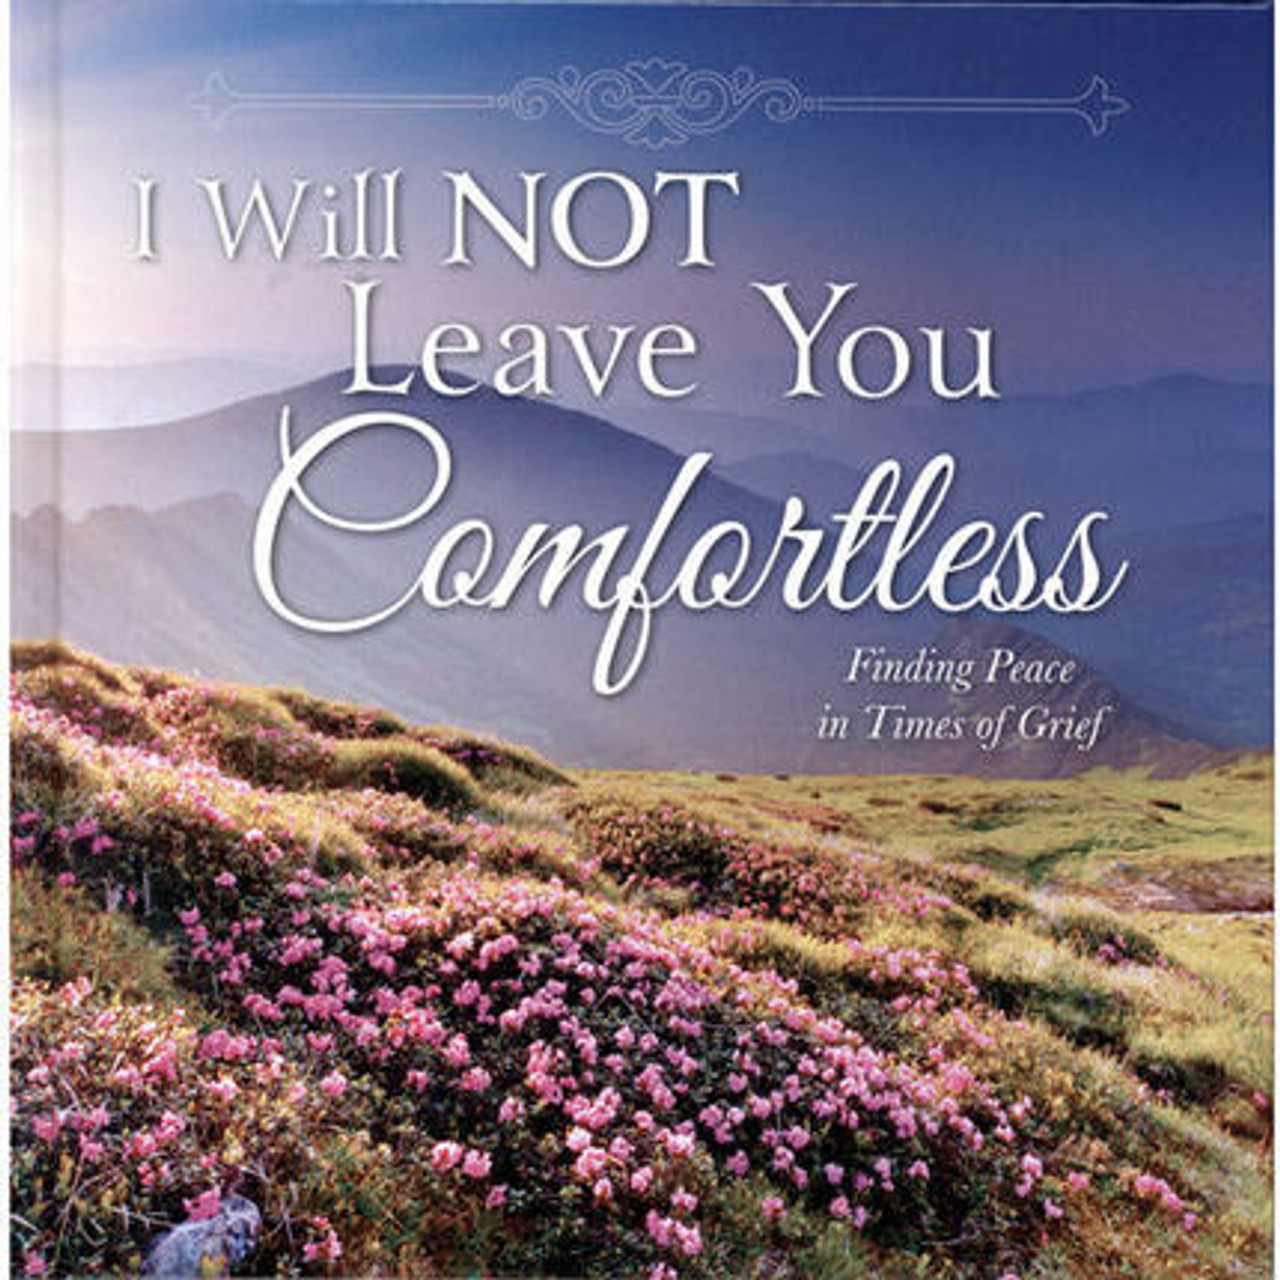  I Will Not Leave You Comfortless: Finding Peace in Times of Grief (Hardcover)